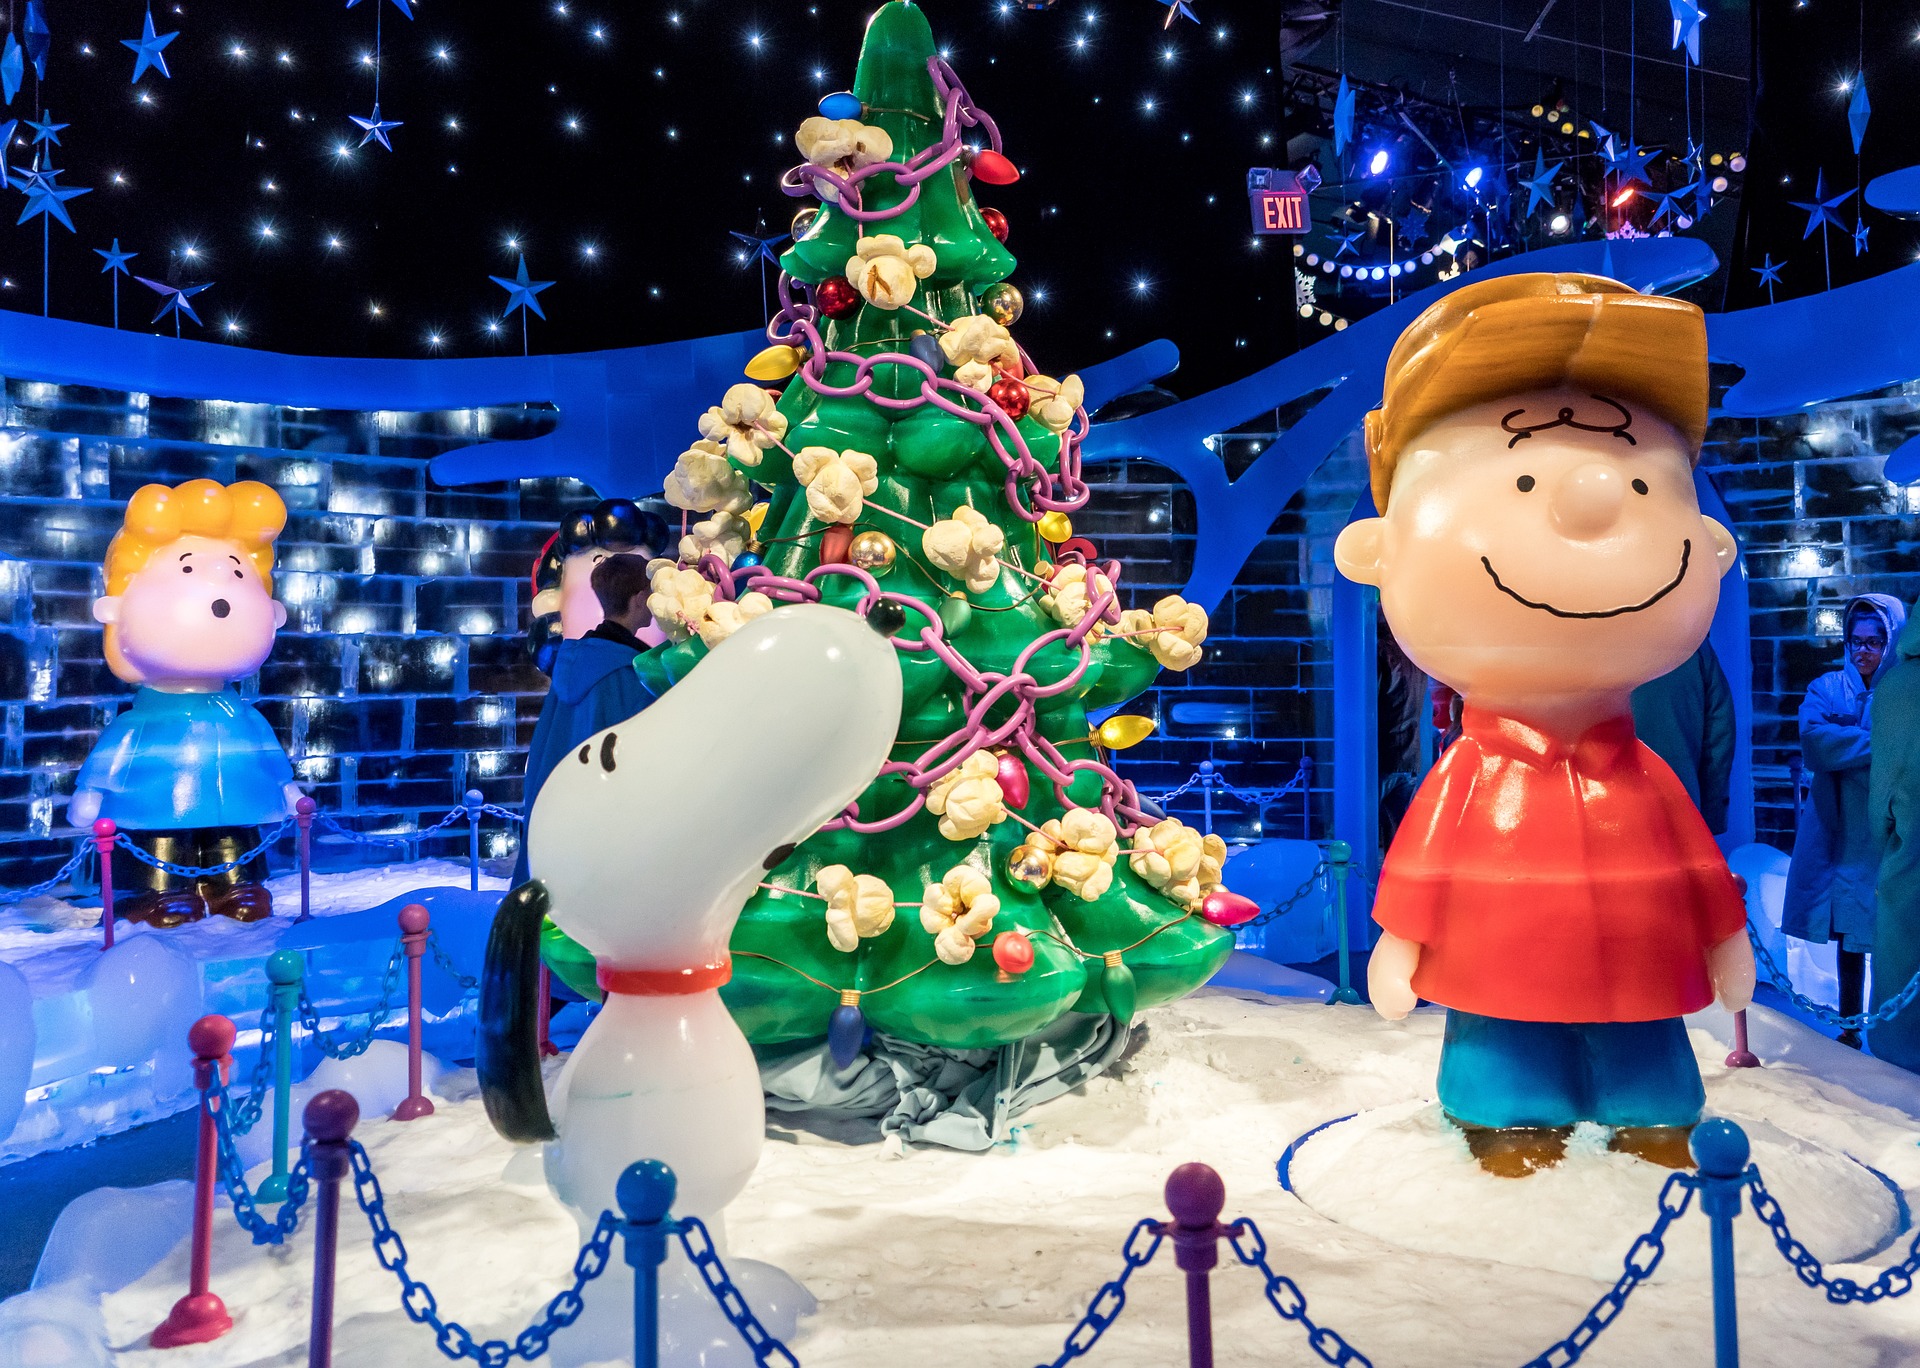 Ice sculpture of Charlie Brown, Snoopy, and big Christmas Tree